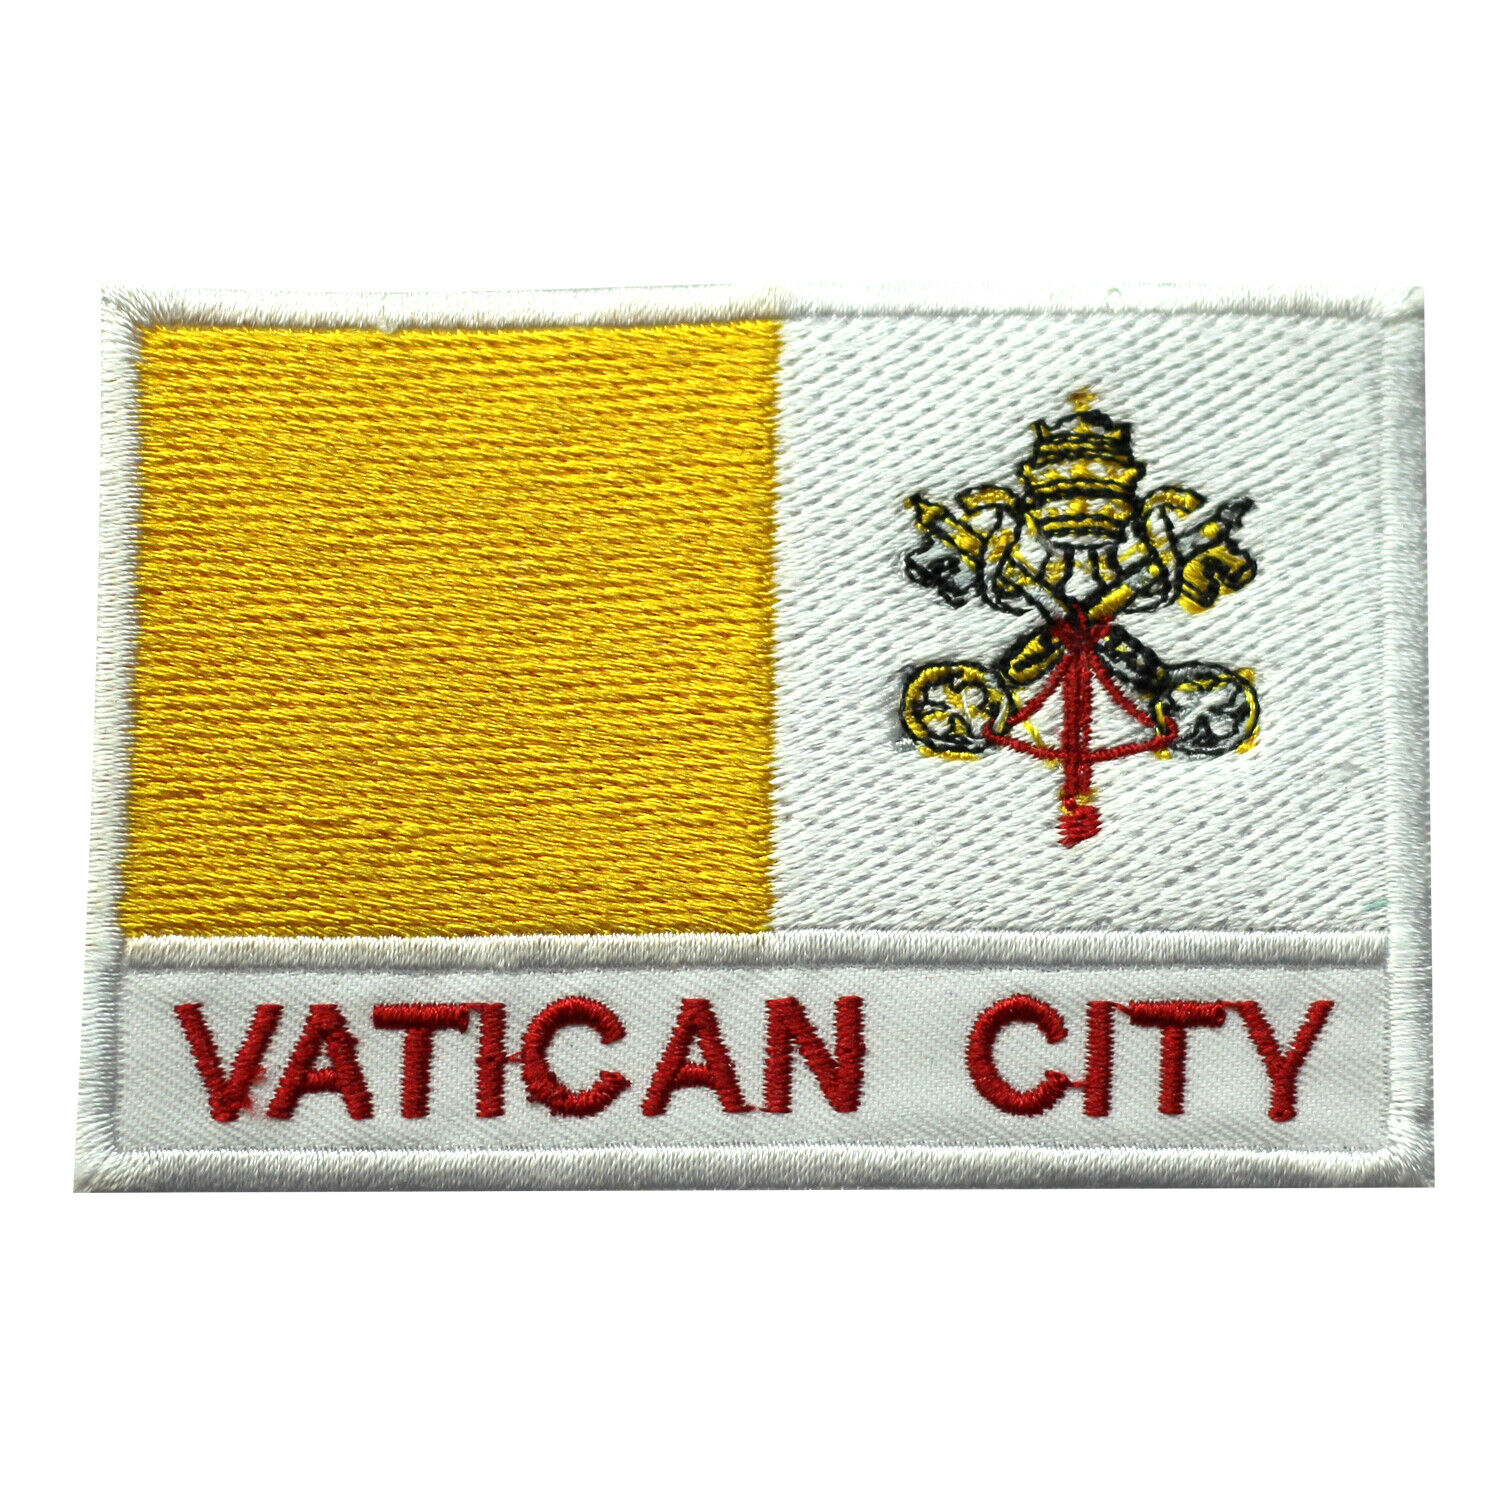 Vatican City Country Flag Patch Iron On Patch Sew On Badge Embroidered Patch